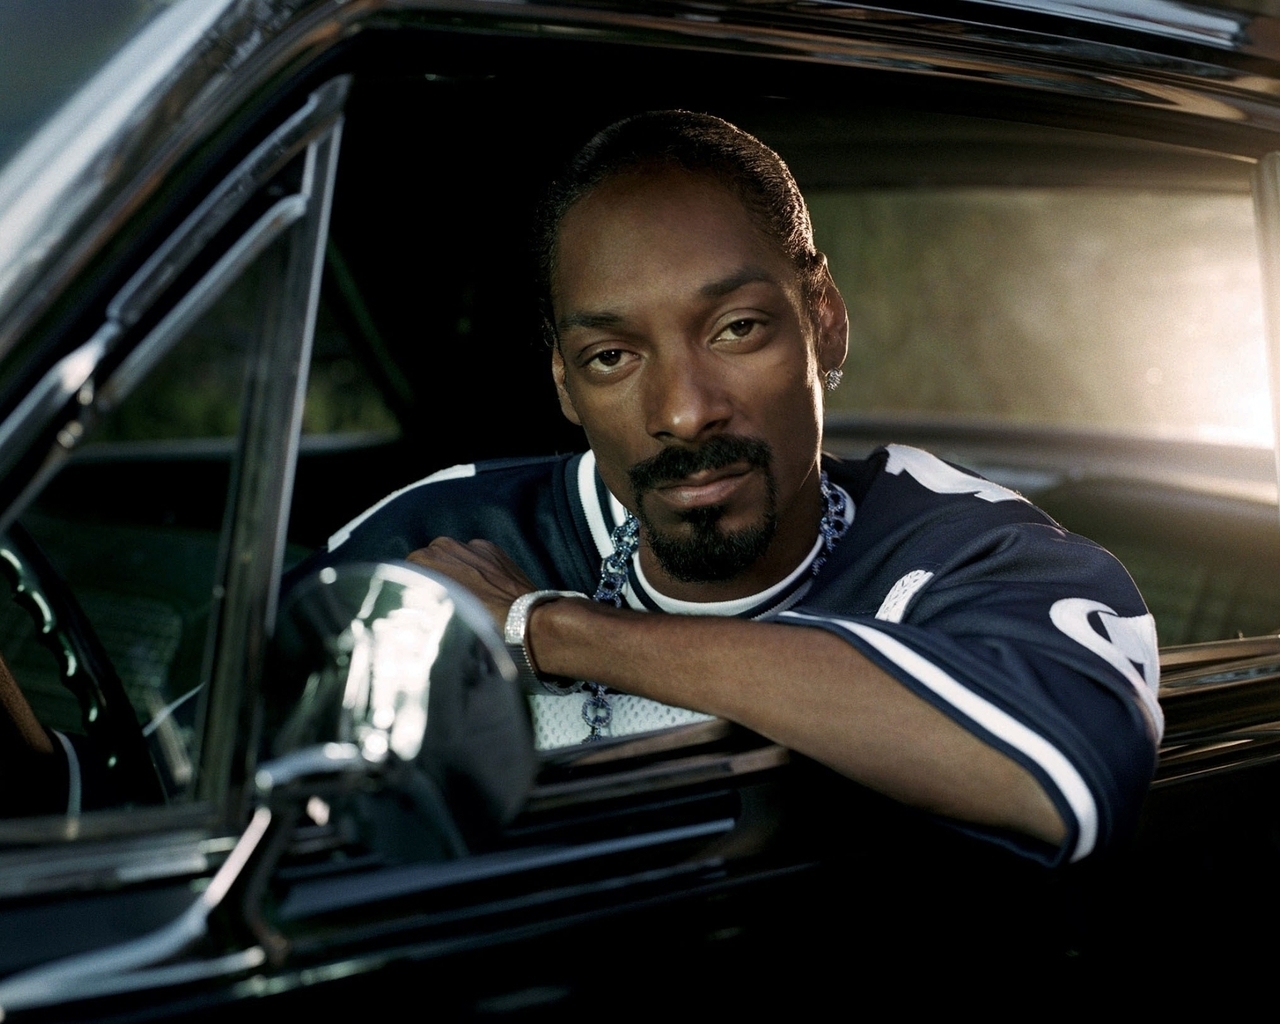 Snoop Dogg Look for 1280 x 1024 resolution